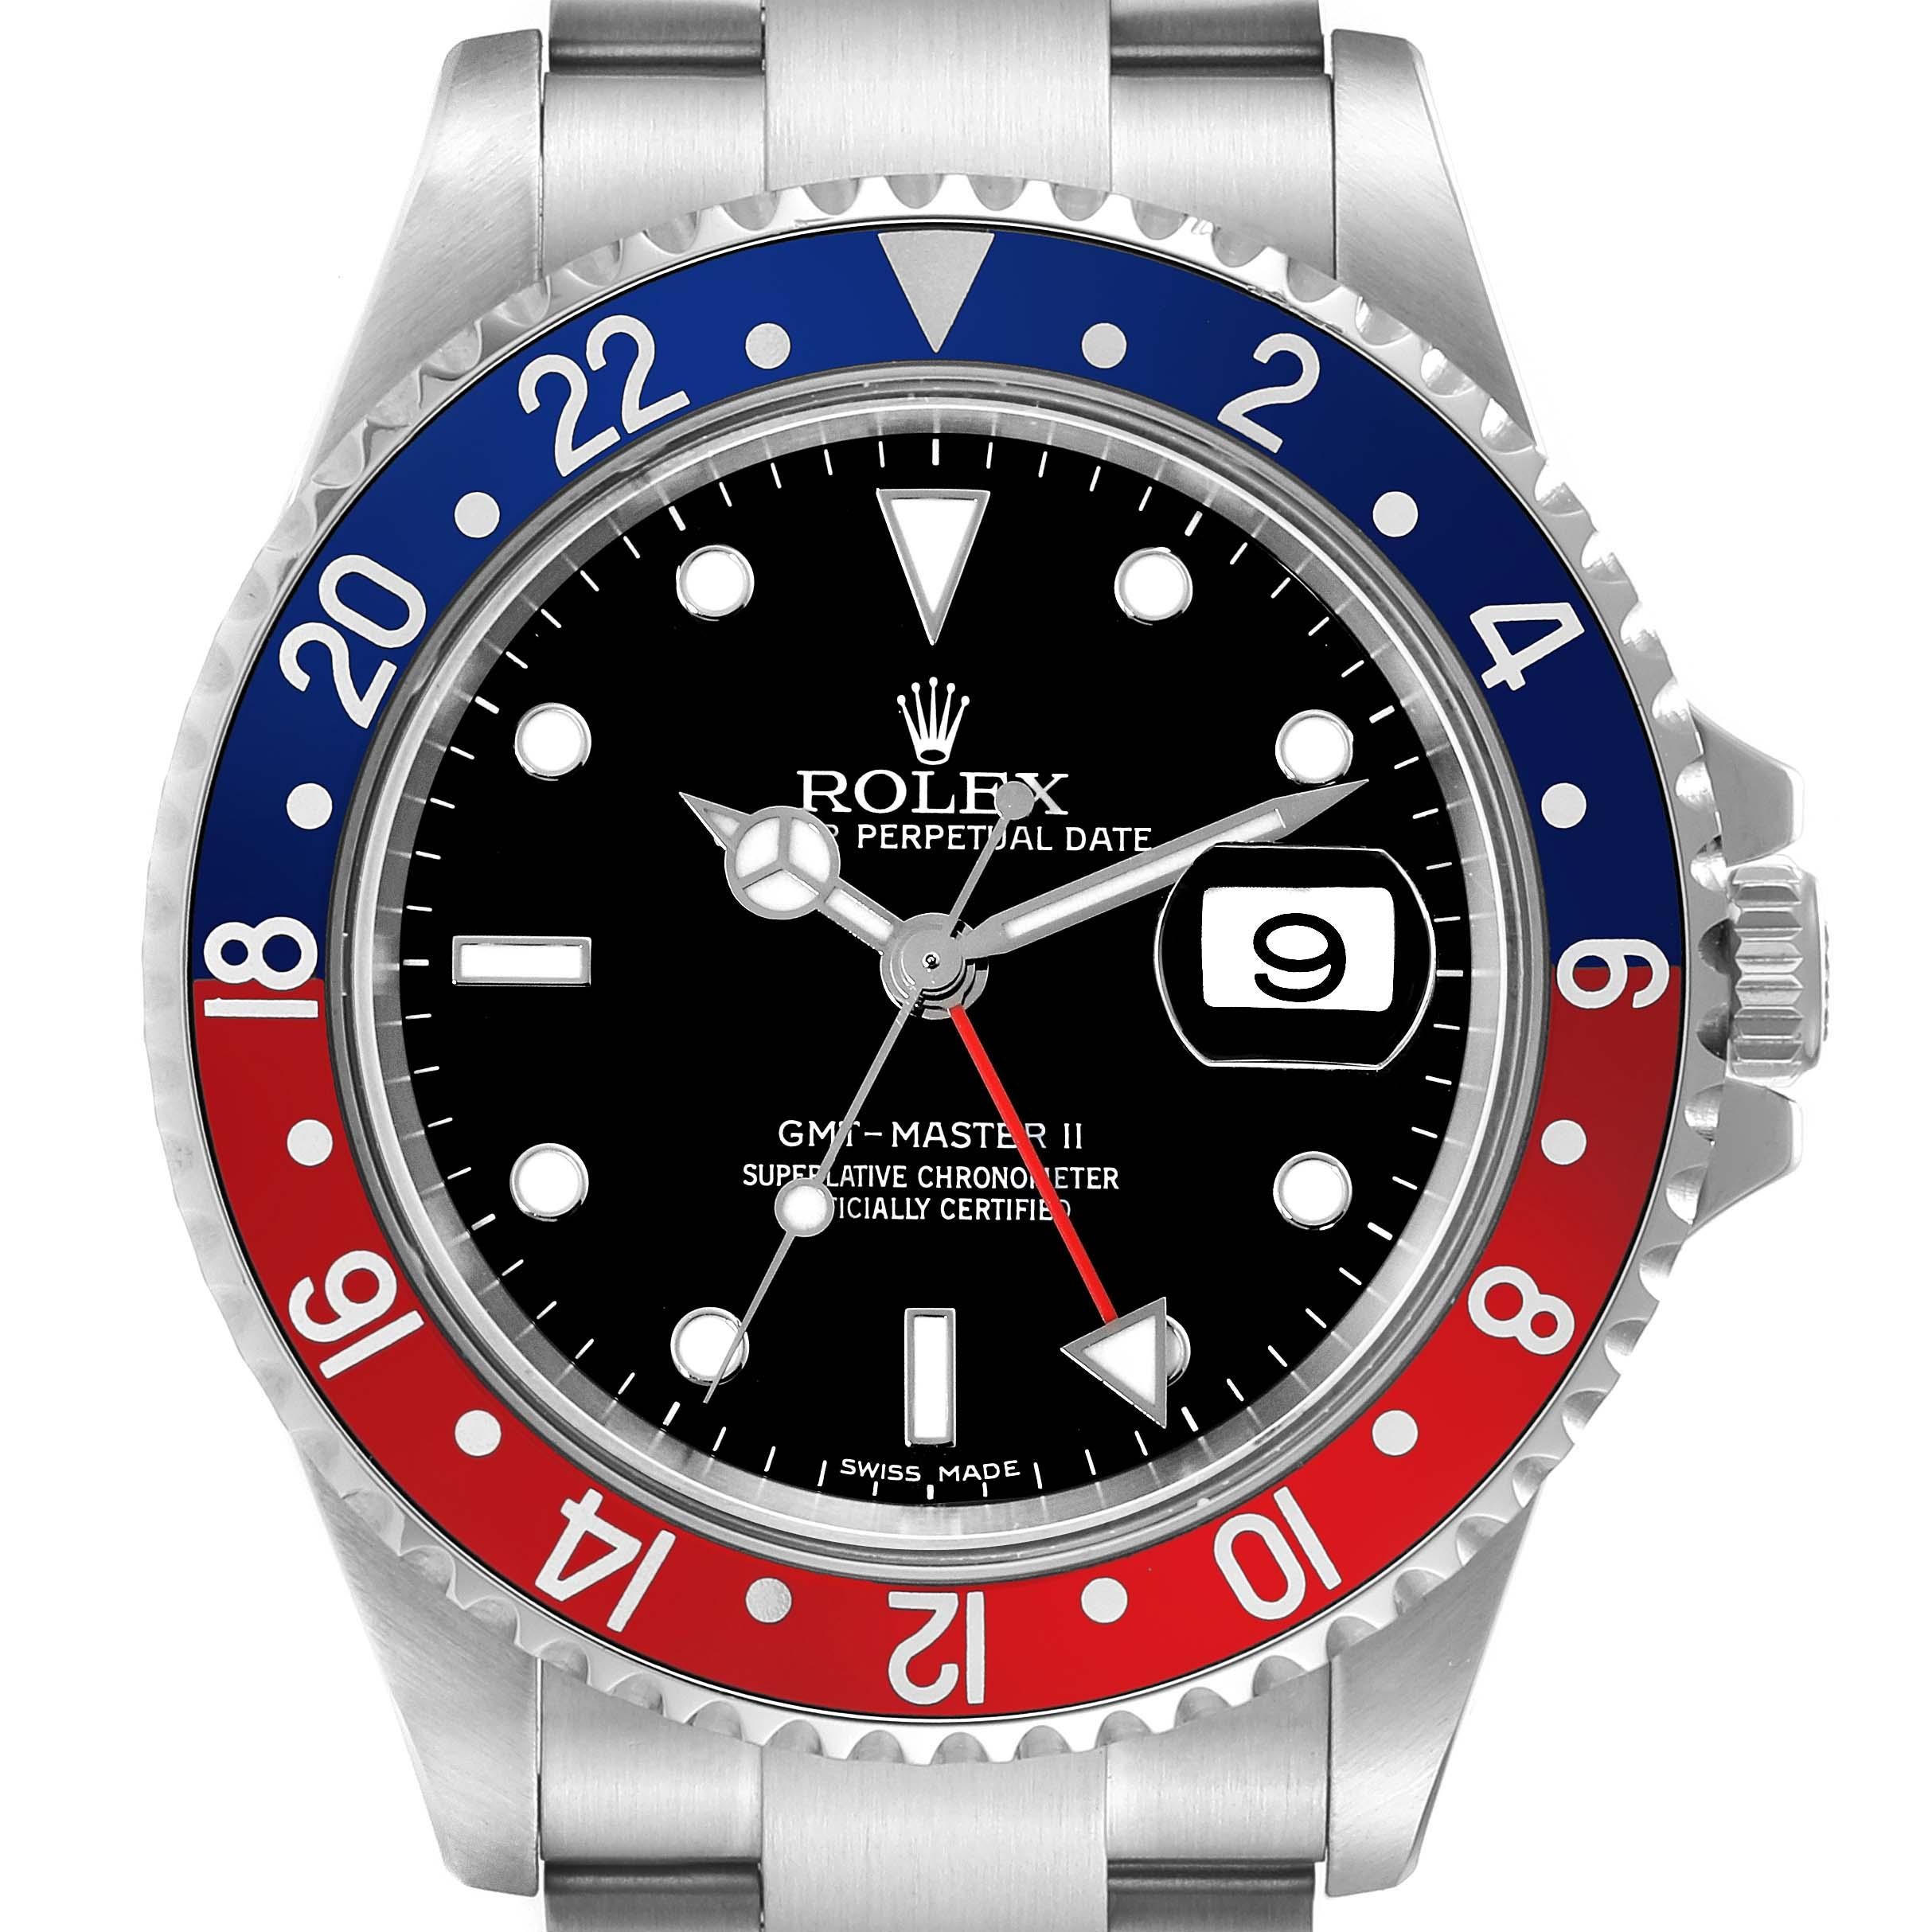 Rolex GMT Master II Blue Red Pepsi Error Dial Mens Watch 16710 Box Papers. Officially certified chronometer automatic self-winding movement. Stainless steel case 40.0 mm in diameter. Rolex logo on the crown. Bidirectional rotating GMT bezel with a